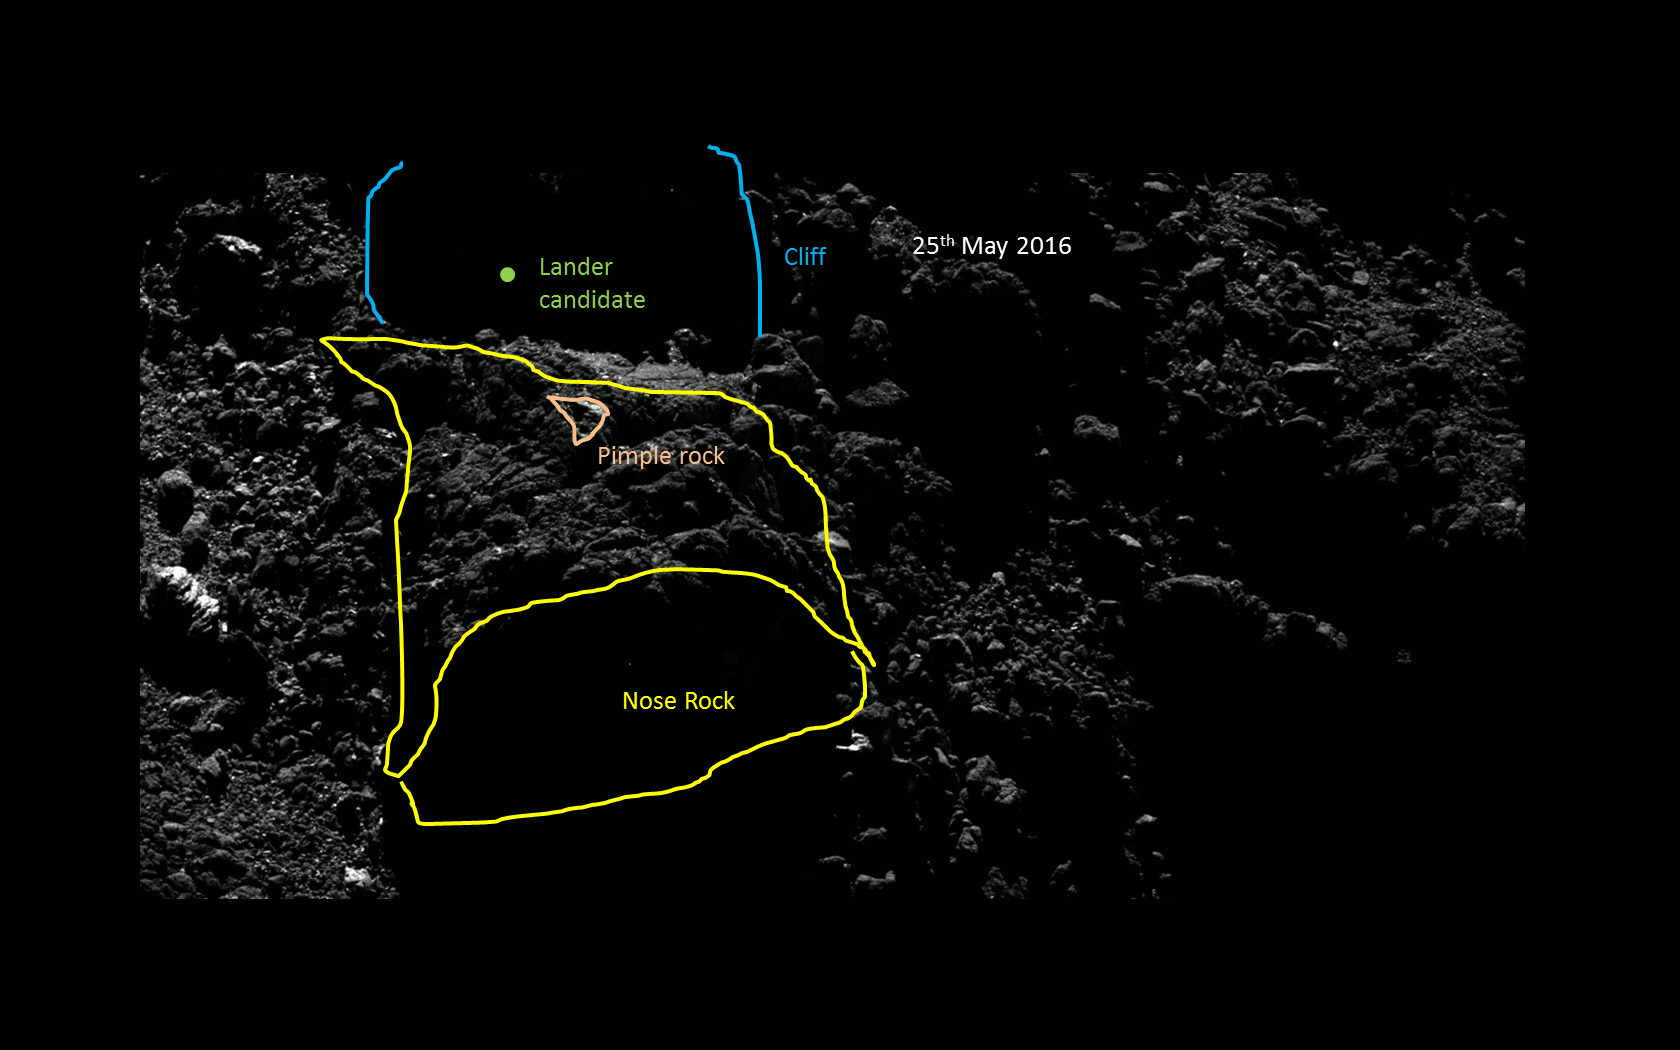 Images taken on 25 May 2016, with key landscape features labelled and the lander candidate circled. 3D view of Philae included at same time for comparison purposes Credits: image: ESA/Rosetta/MPS for OSIRIS Team MPS/UPD/LAM/IAA/SSO/INTA/UPM/DASP/IDA; Lander search analysis: L. O’Rourke; 3D Philae shape: CNES/ A.Charpentier